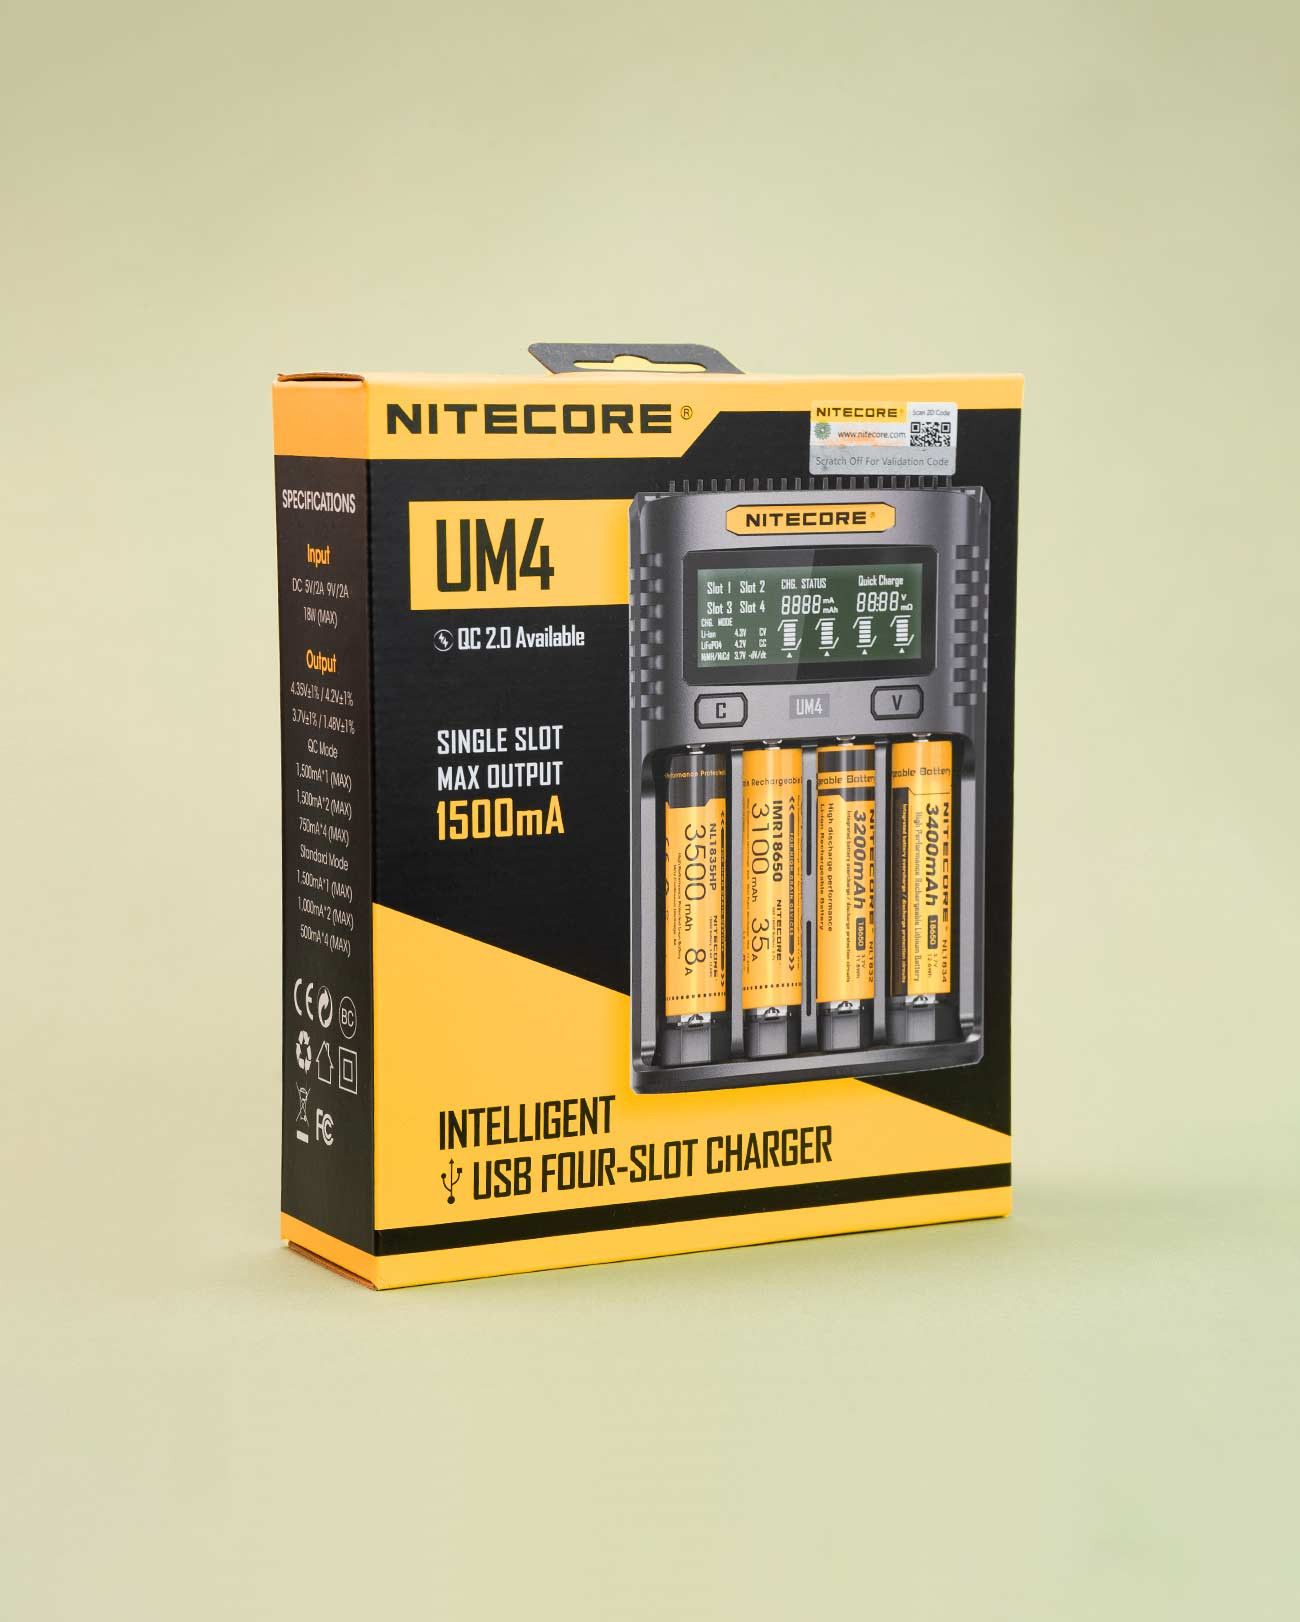 Chargeurs CHARGEUR ACCUS NITECORE I4